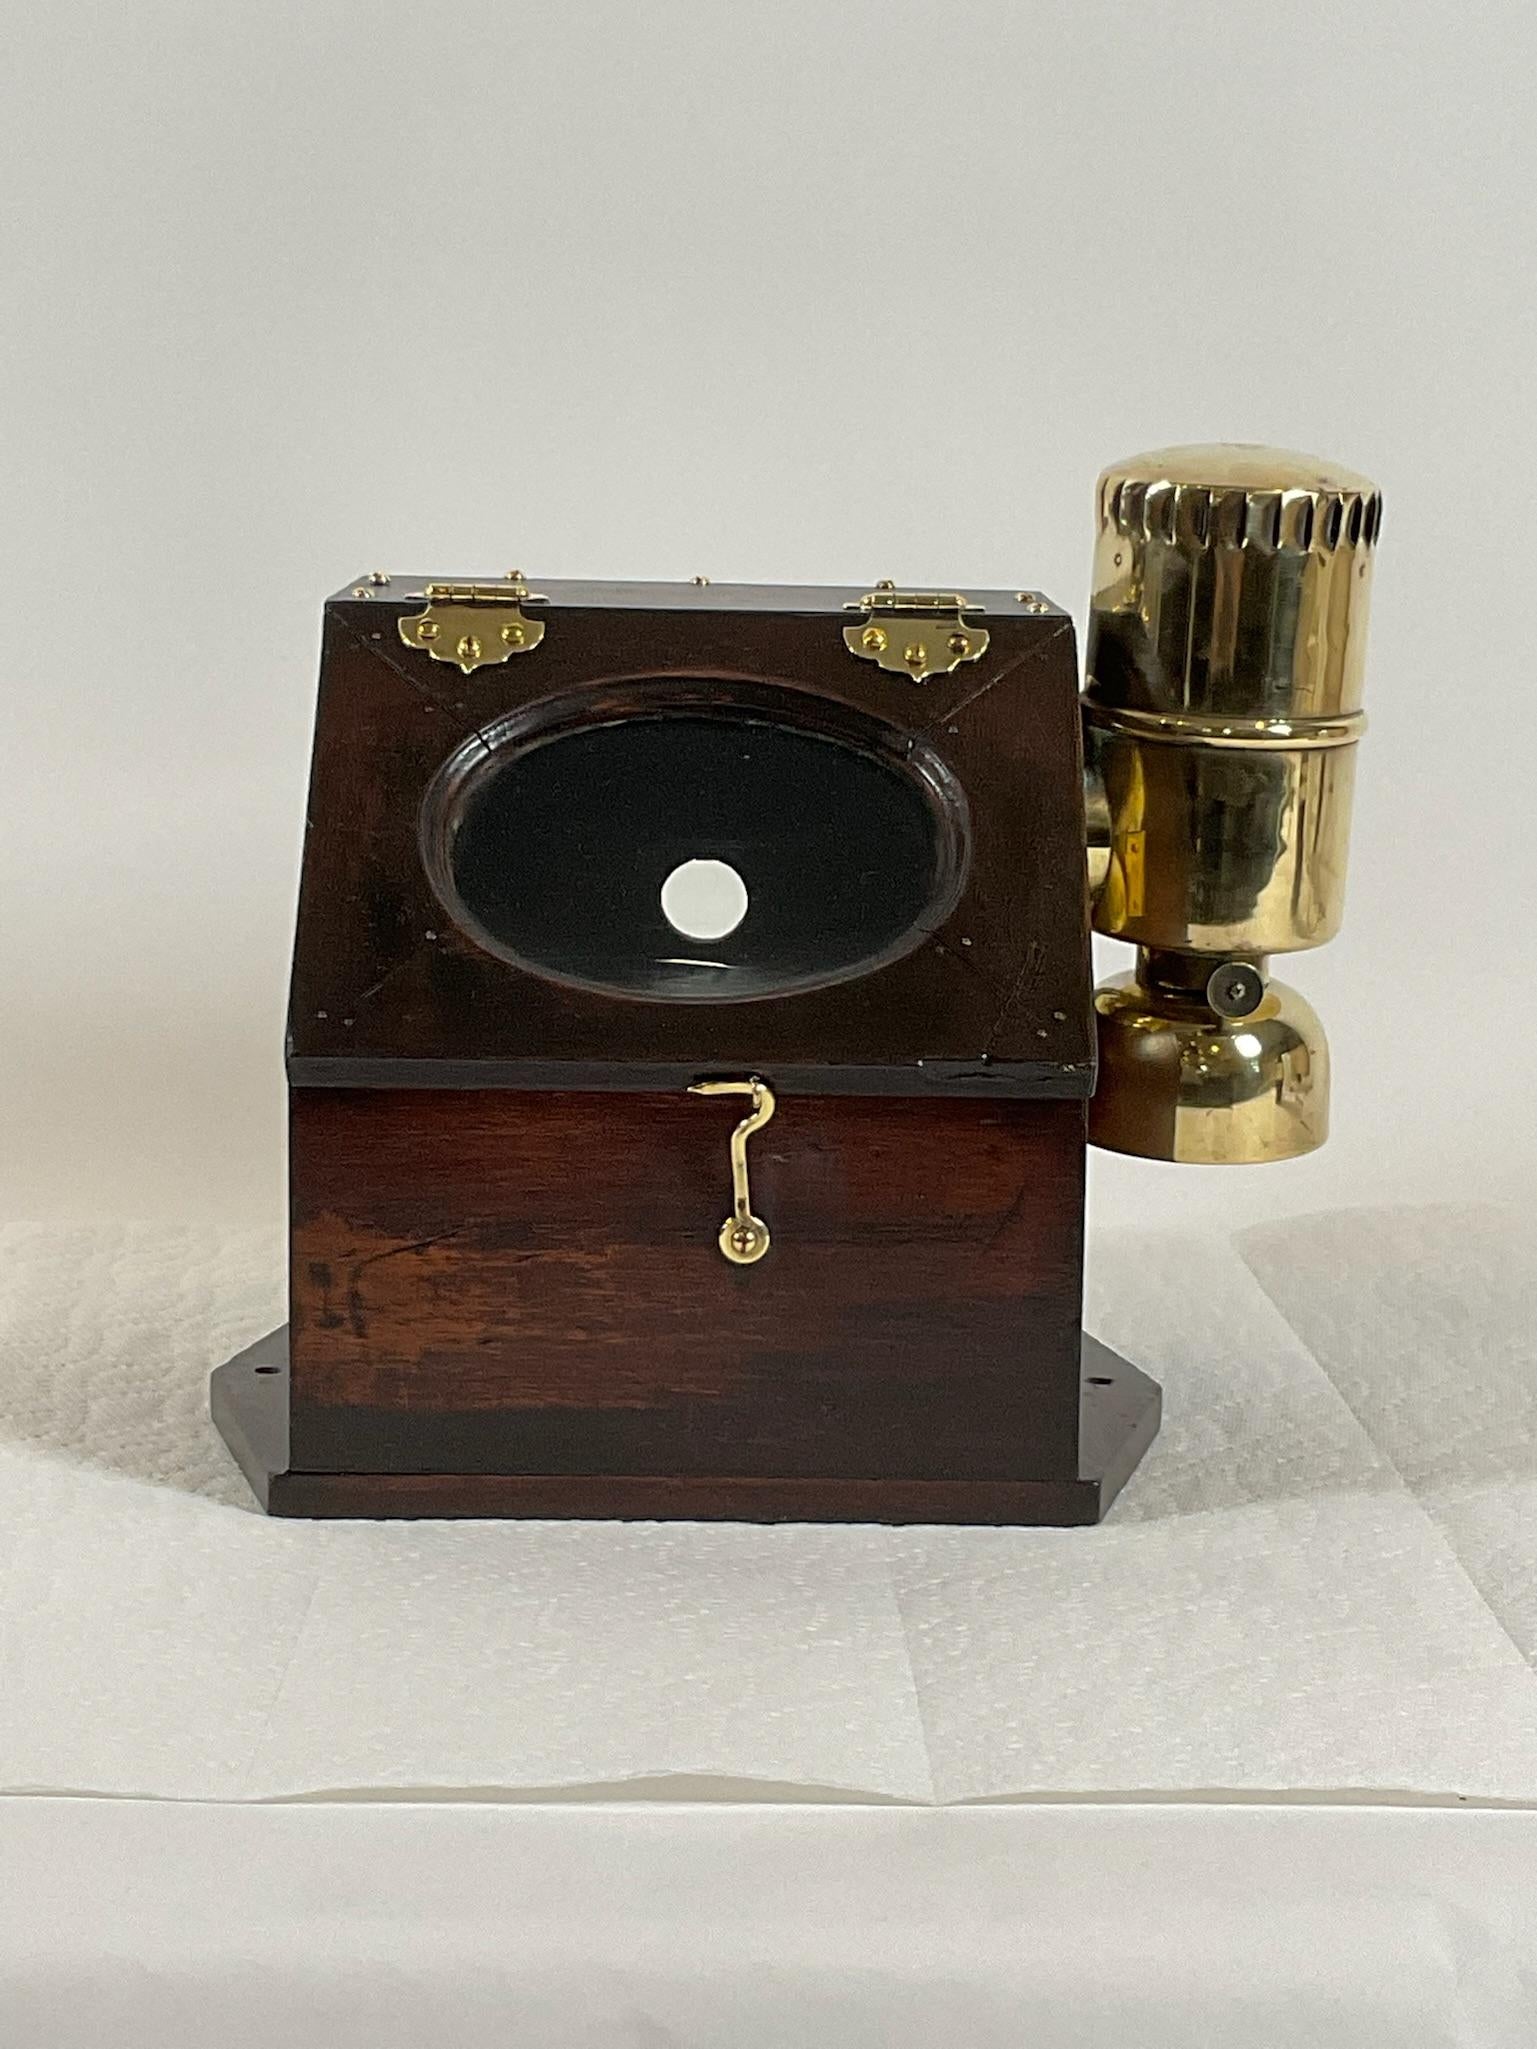 Rare yacht binnacle with a highly polished gimballed compass fitted to a varnished box. The box has a polished brass side burner and hinges, hooks, and screws. First class nautical relic. Signed by George A Baker, Melrose Mass.

Weight: 9